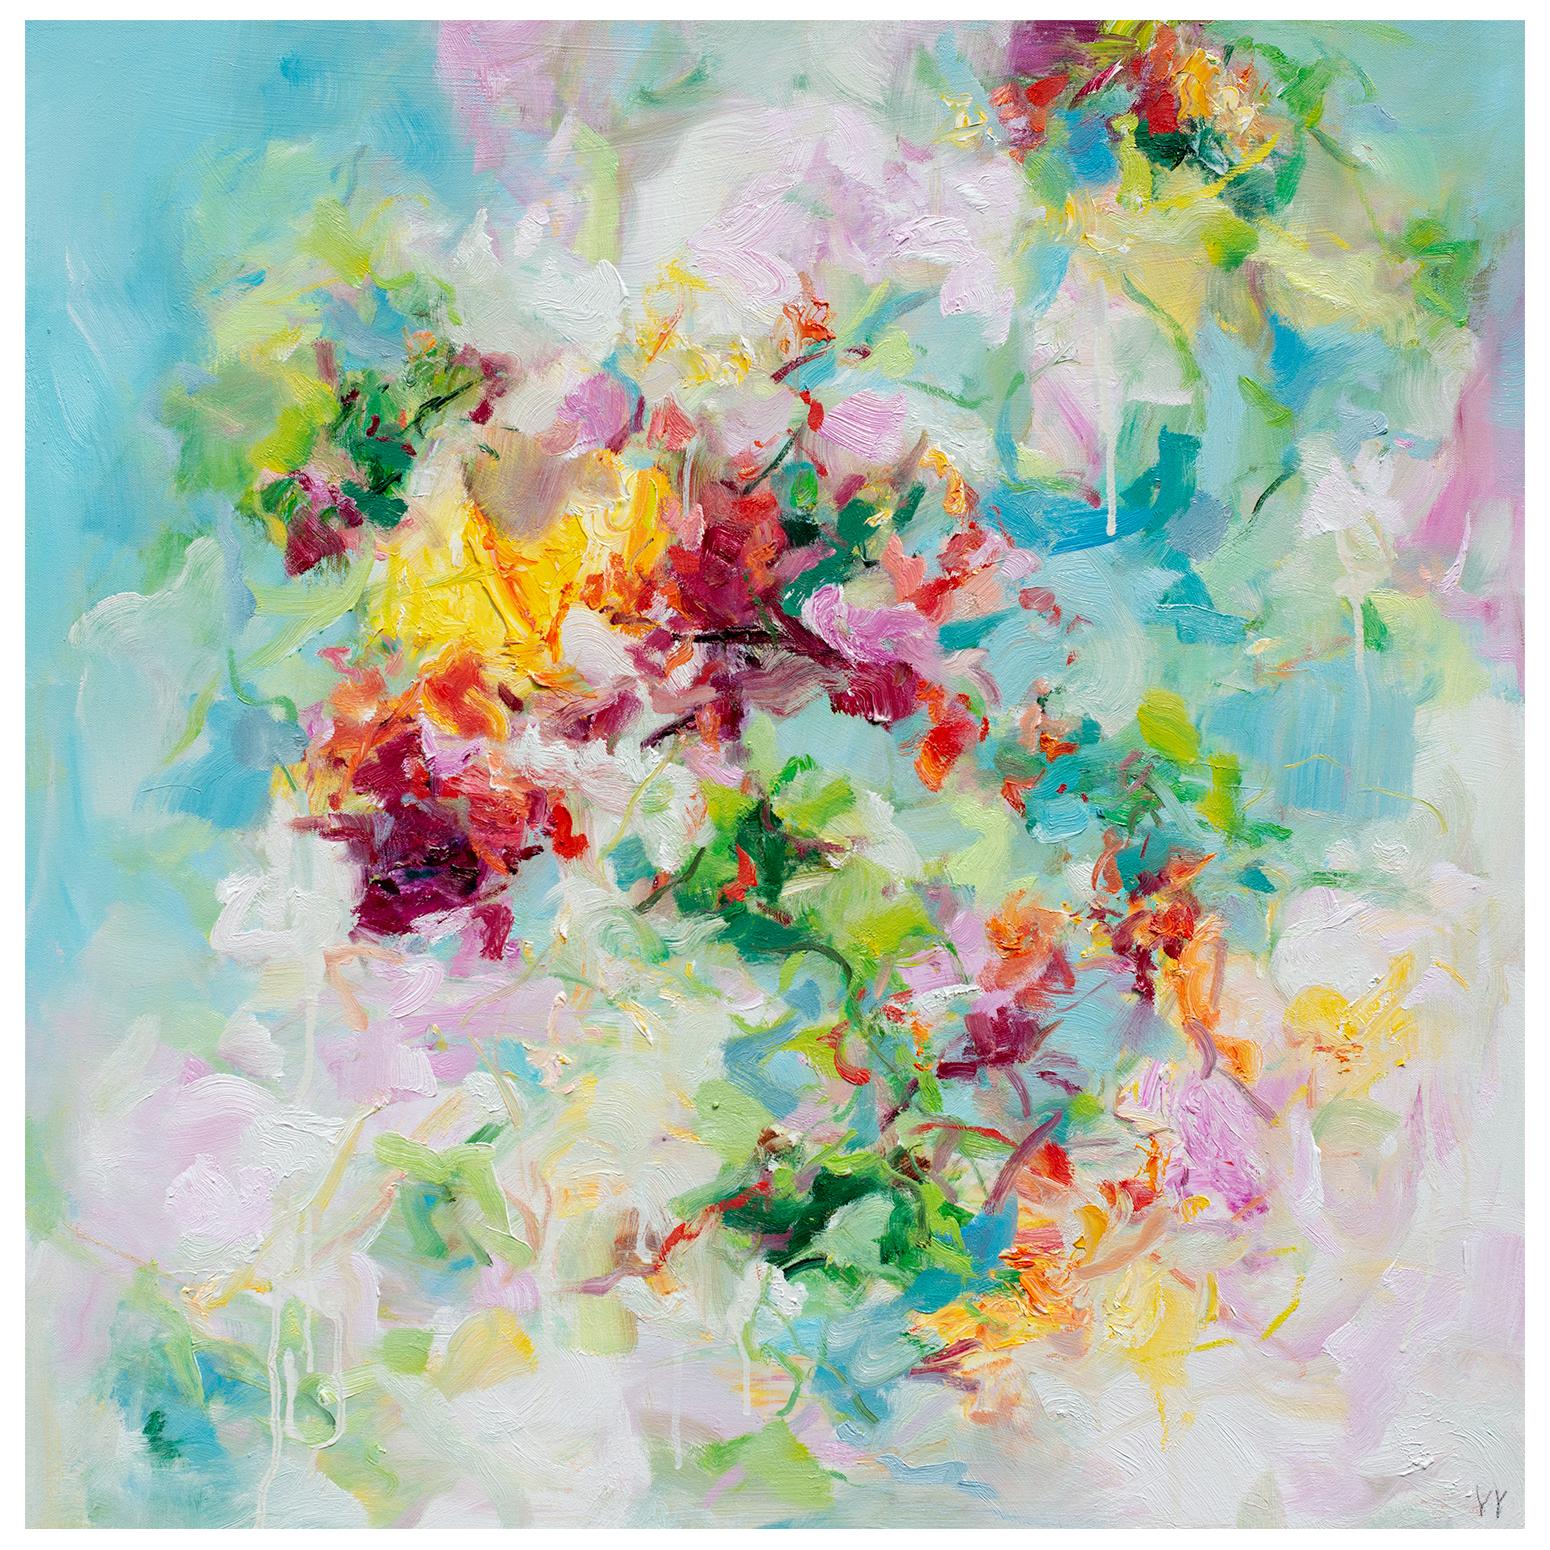 Available at Madelyn Jordon Fine Art. 'Ideal' 2023 by Chinese/Canadian artist Yangyang Pan. Oil on canvas, 30 x 30 in. / Frame: 31 x 31 in. This beautiful abstract-expressionistic landscape painting incorporates gestural brushstrokes resembling a